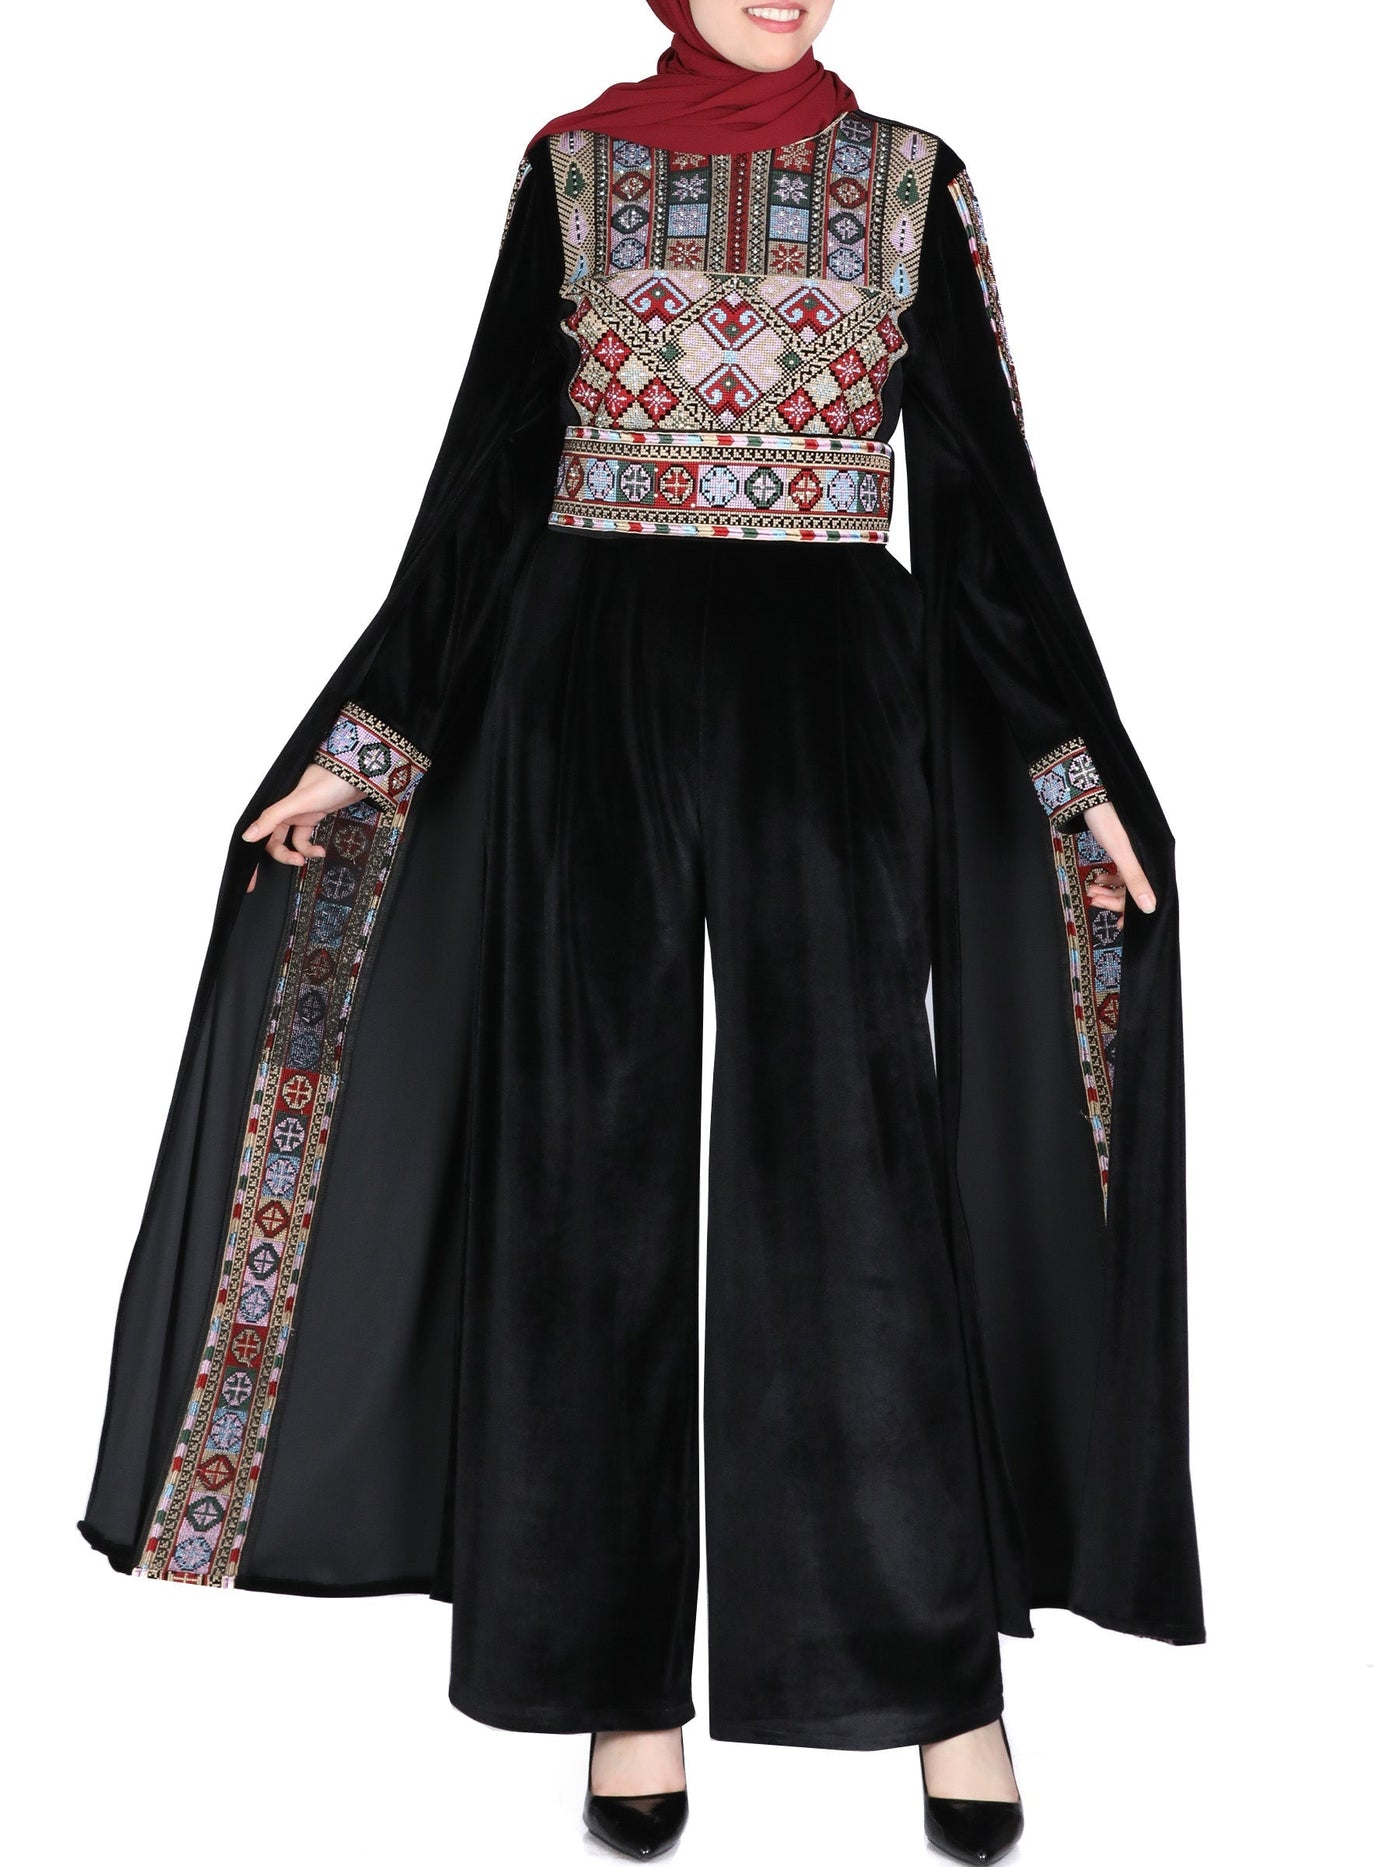 Embroidered Jumpsuit -High Quality Embroidered Palestinian style Jumpsuit